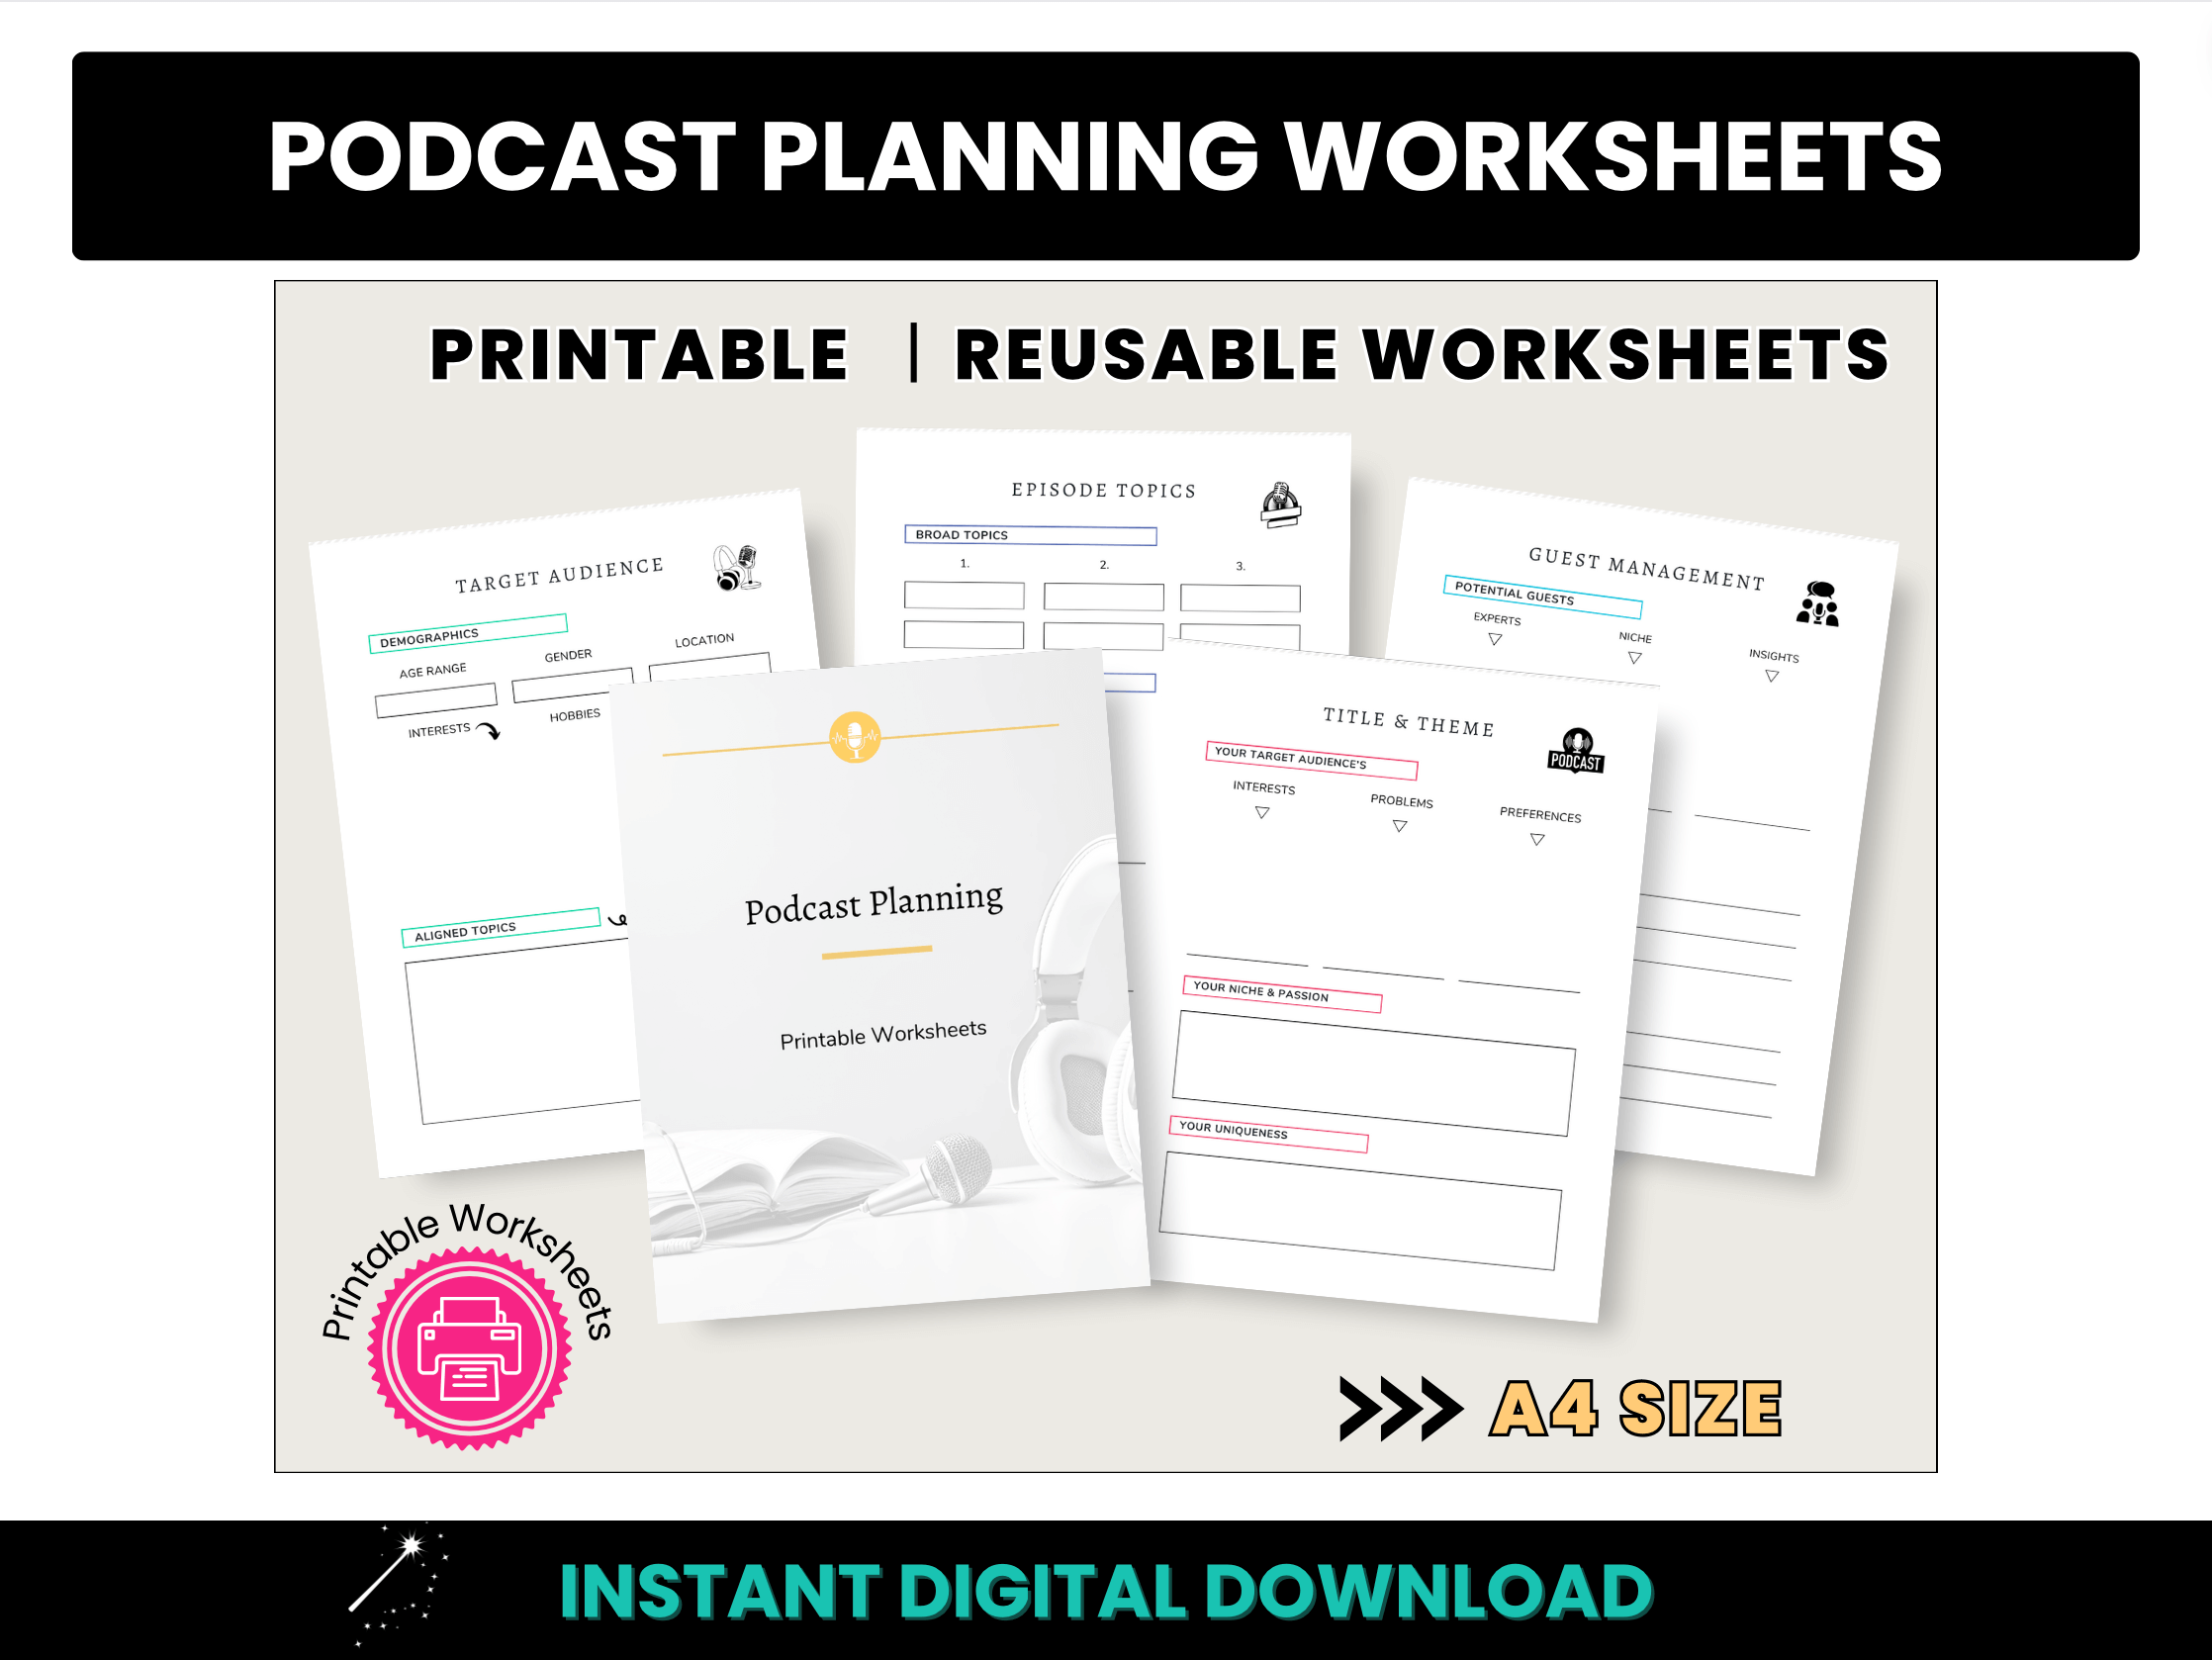 Podcast Planning Worksheets - A4 Size